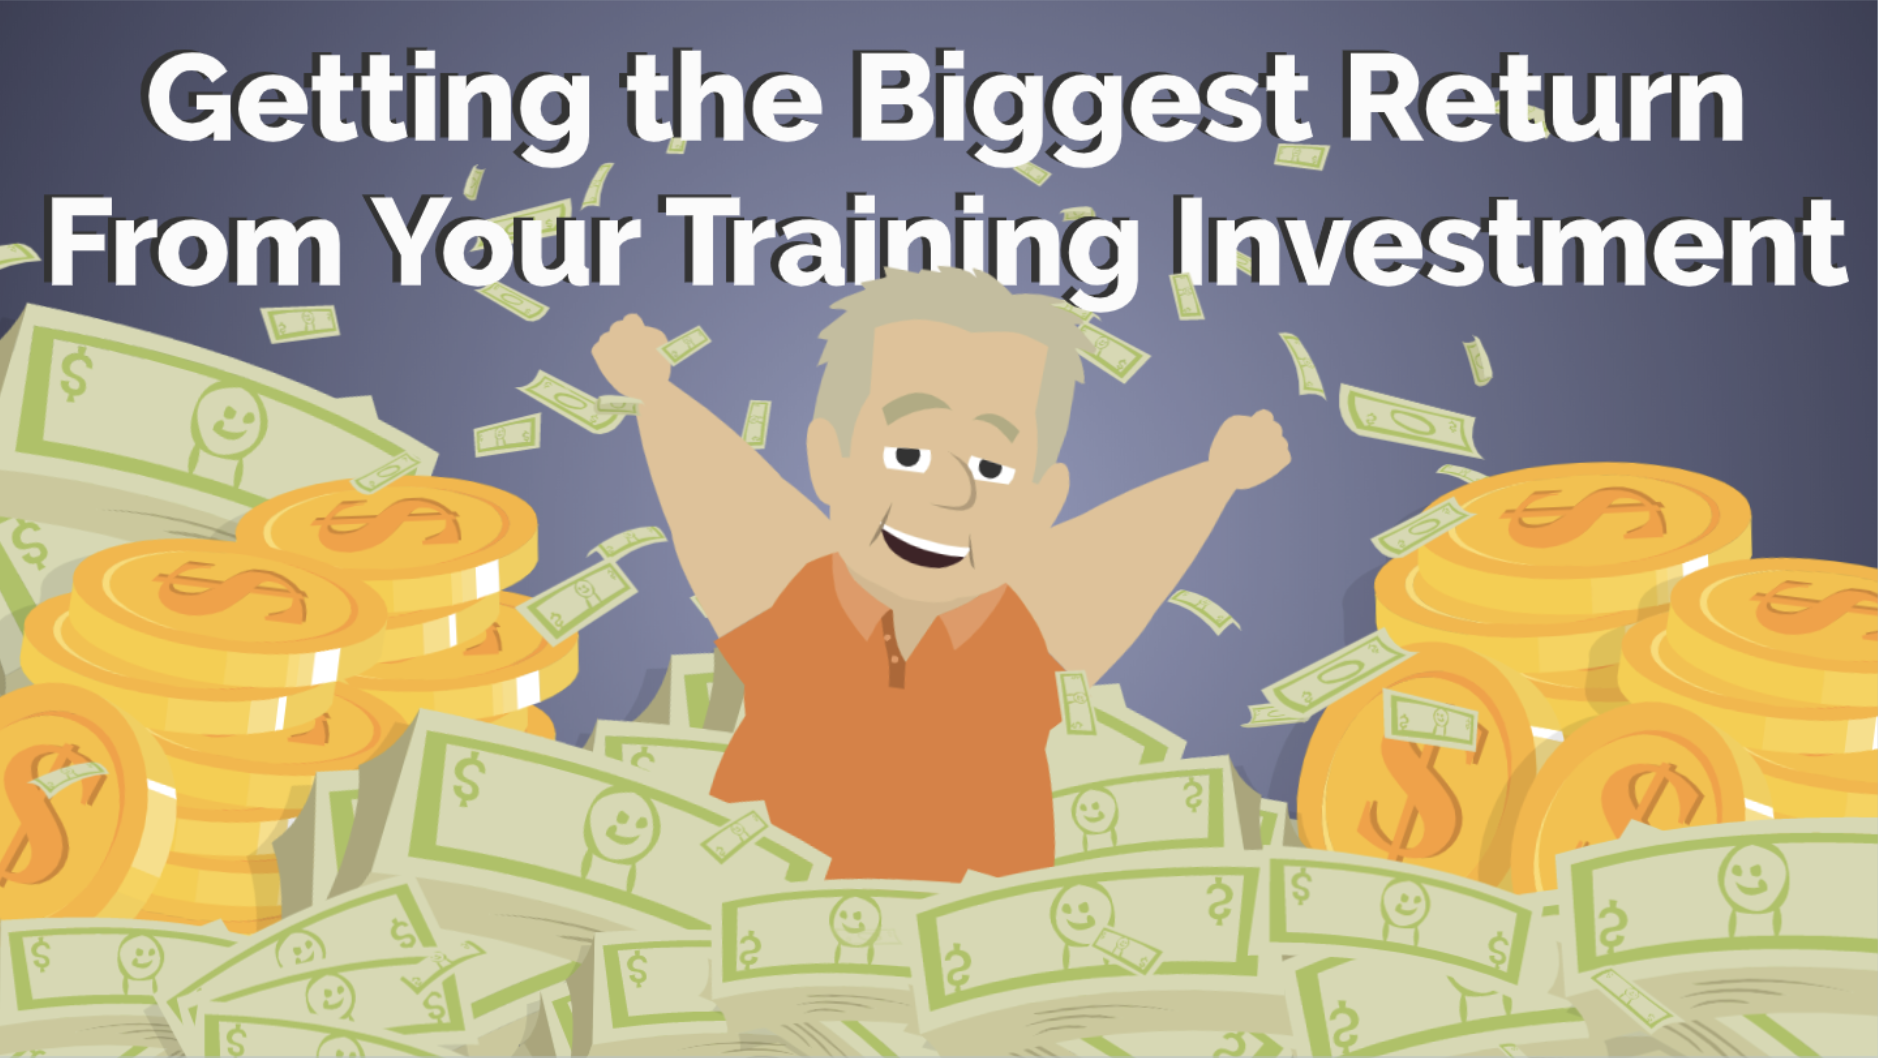 Getting the Biggest return from your training investment webinar promo image